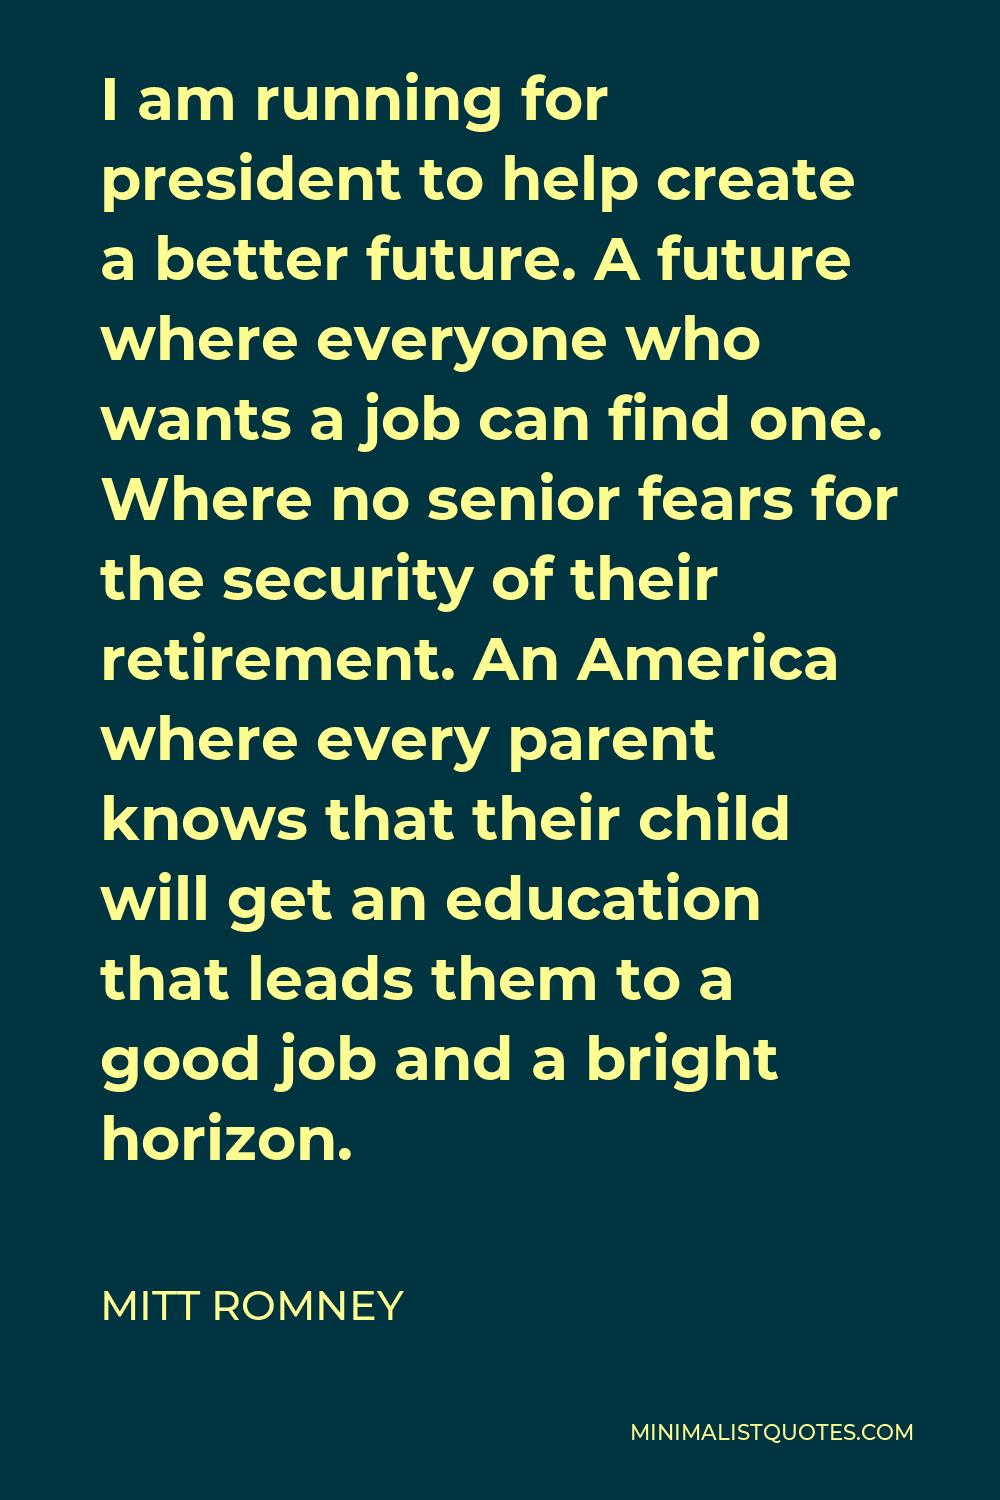 Mitt Romney Quote - I am running for president to help create a better future. A future where everyone who wants a job can find one. Where no senior fears for the security of their retirement. An America where every parent knows that their child will get an education that leads them to a good job and a bright horizon.